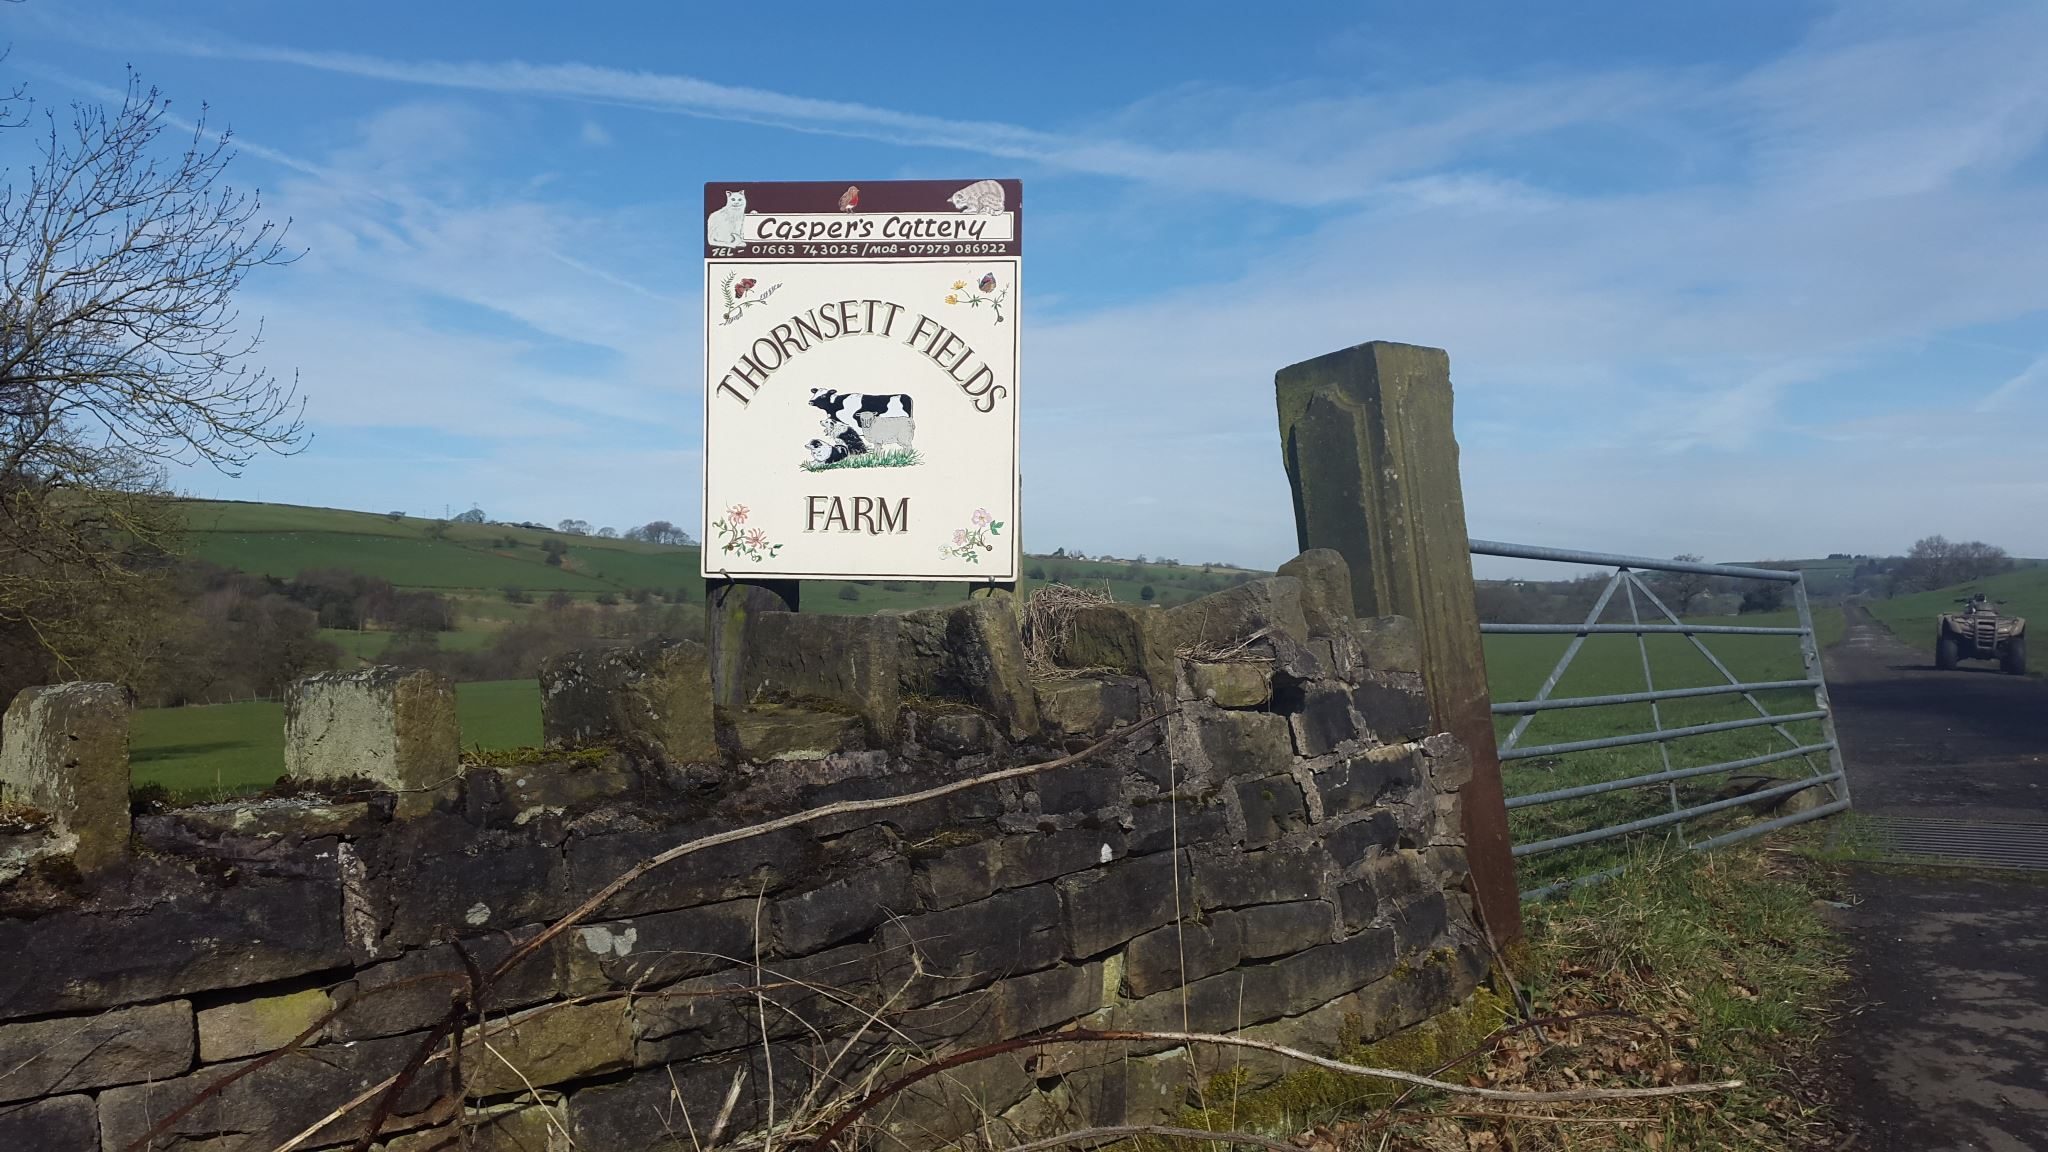 The Entrance to the Farm